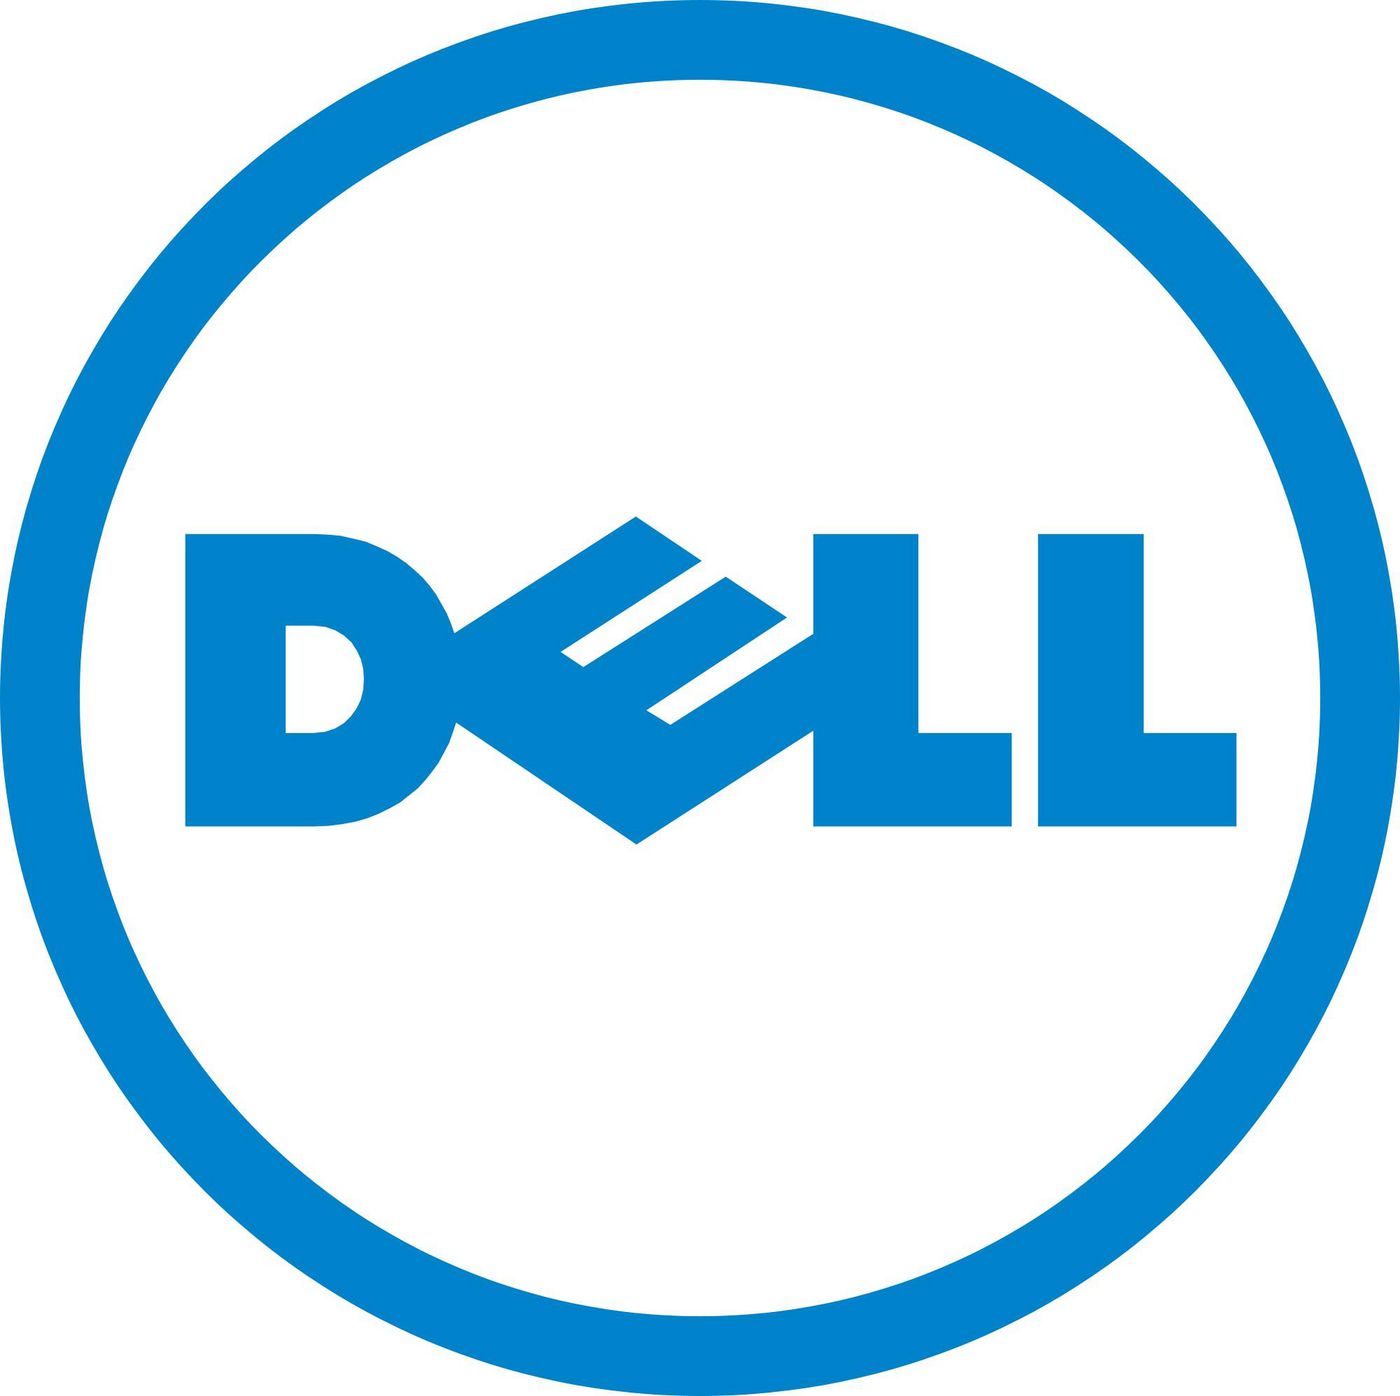 DELL 5 Year Gold Hardware Maintenance by Avocent for the Dell DMPU4032